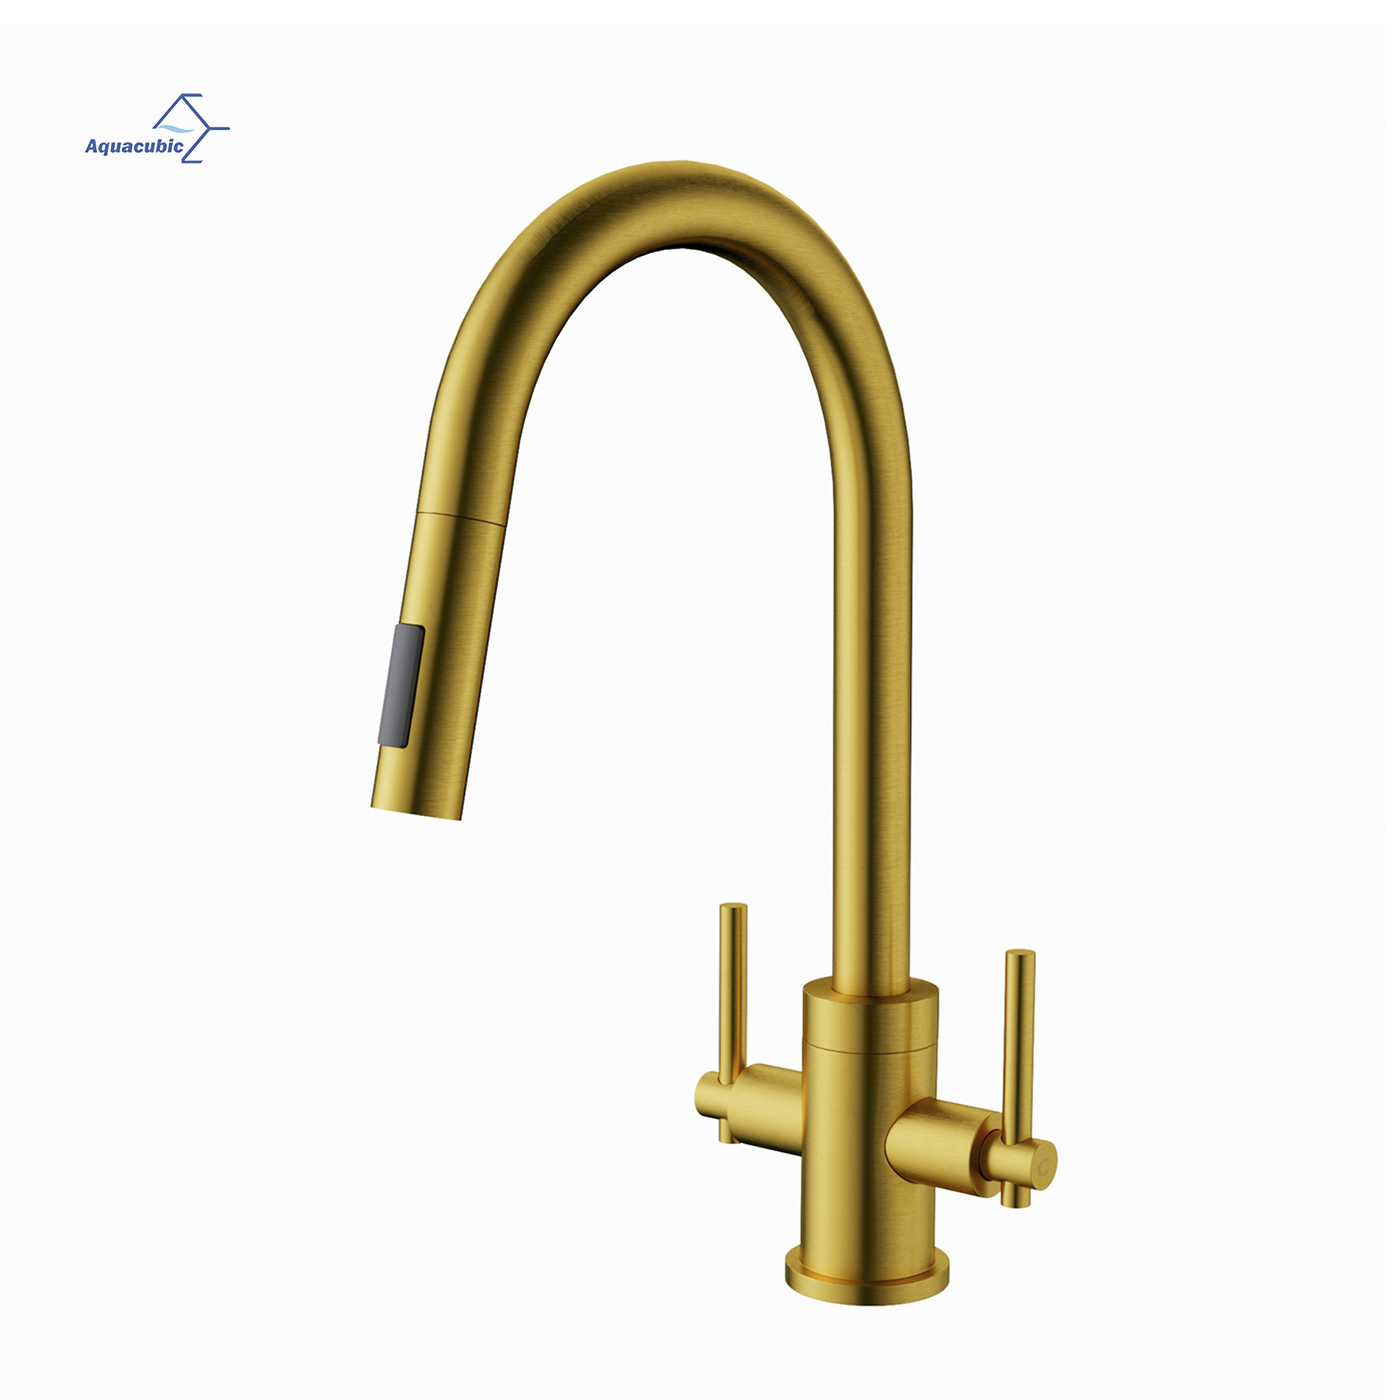 Aquacubic cUPC All kinds of Brass Long Flexible Hose Neck Tap Double Handle Contemporary Golden Pull Down Kitchen Faucet